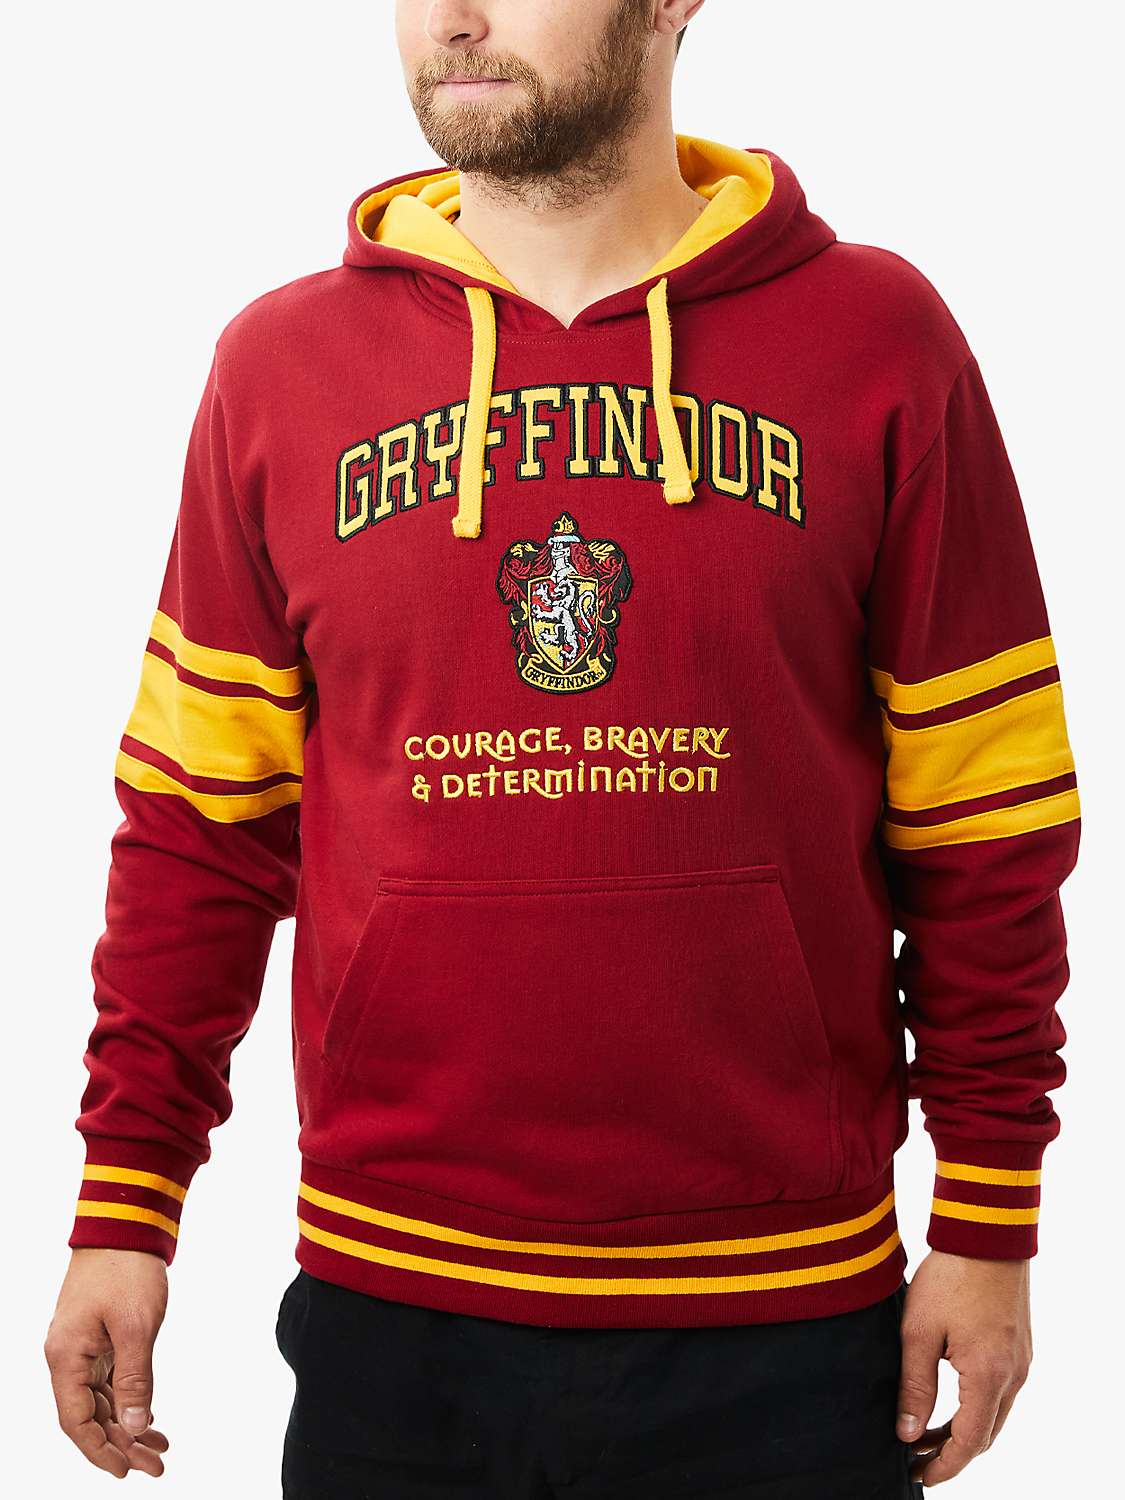 Buy Fabric Flavours Harry Potter Gryffindor House Hoodie Online at johnlewis.com